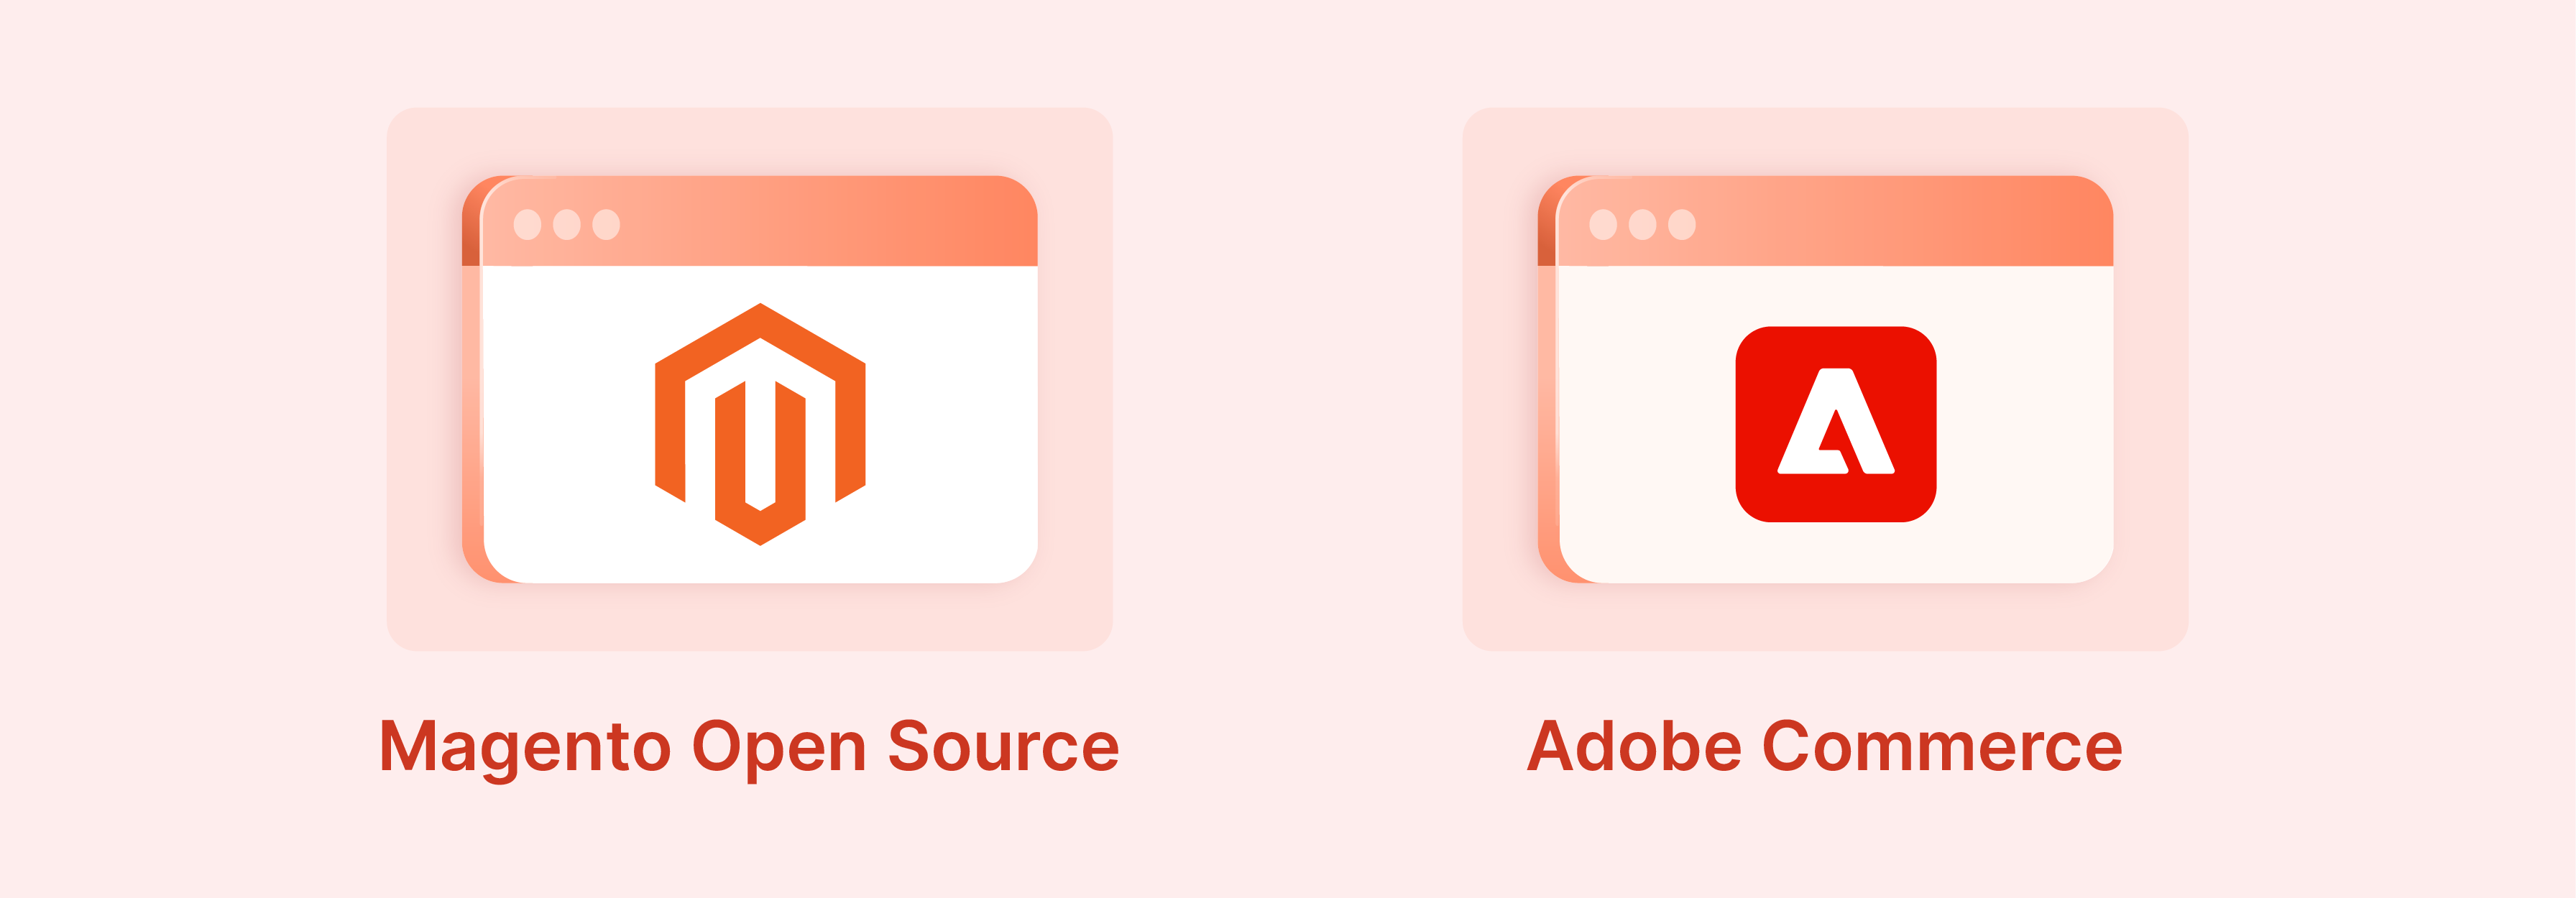 Comparative analysis of Magento Open Source and Adobe Commerce features